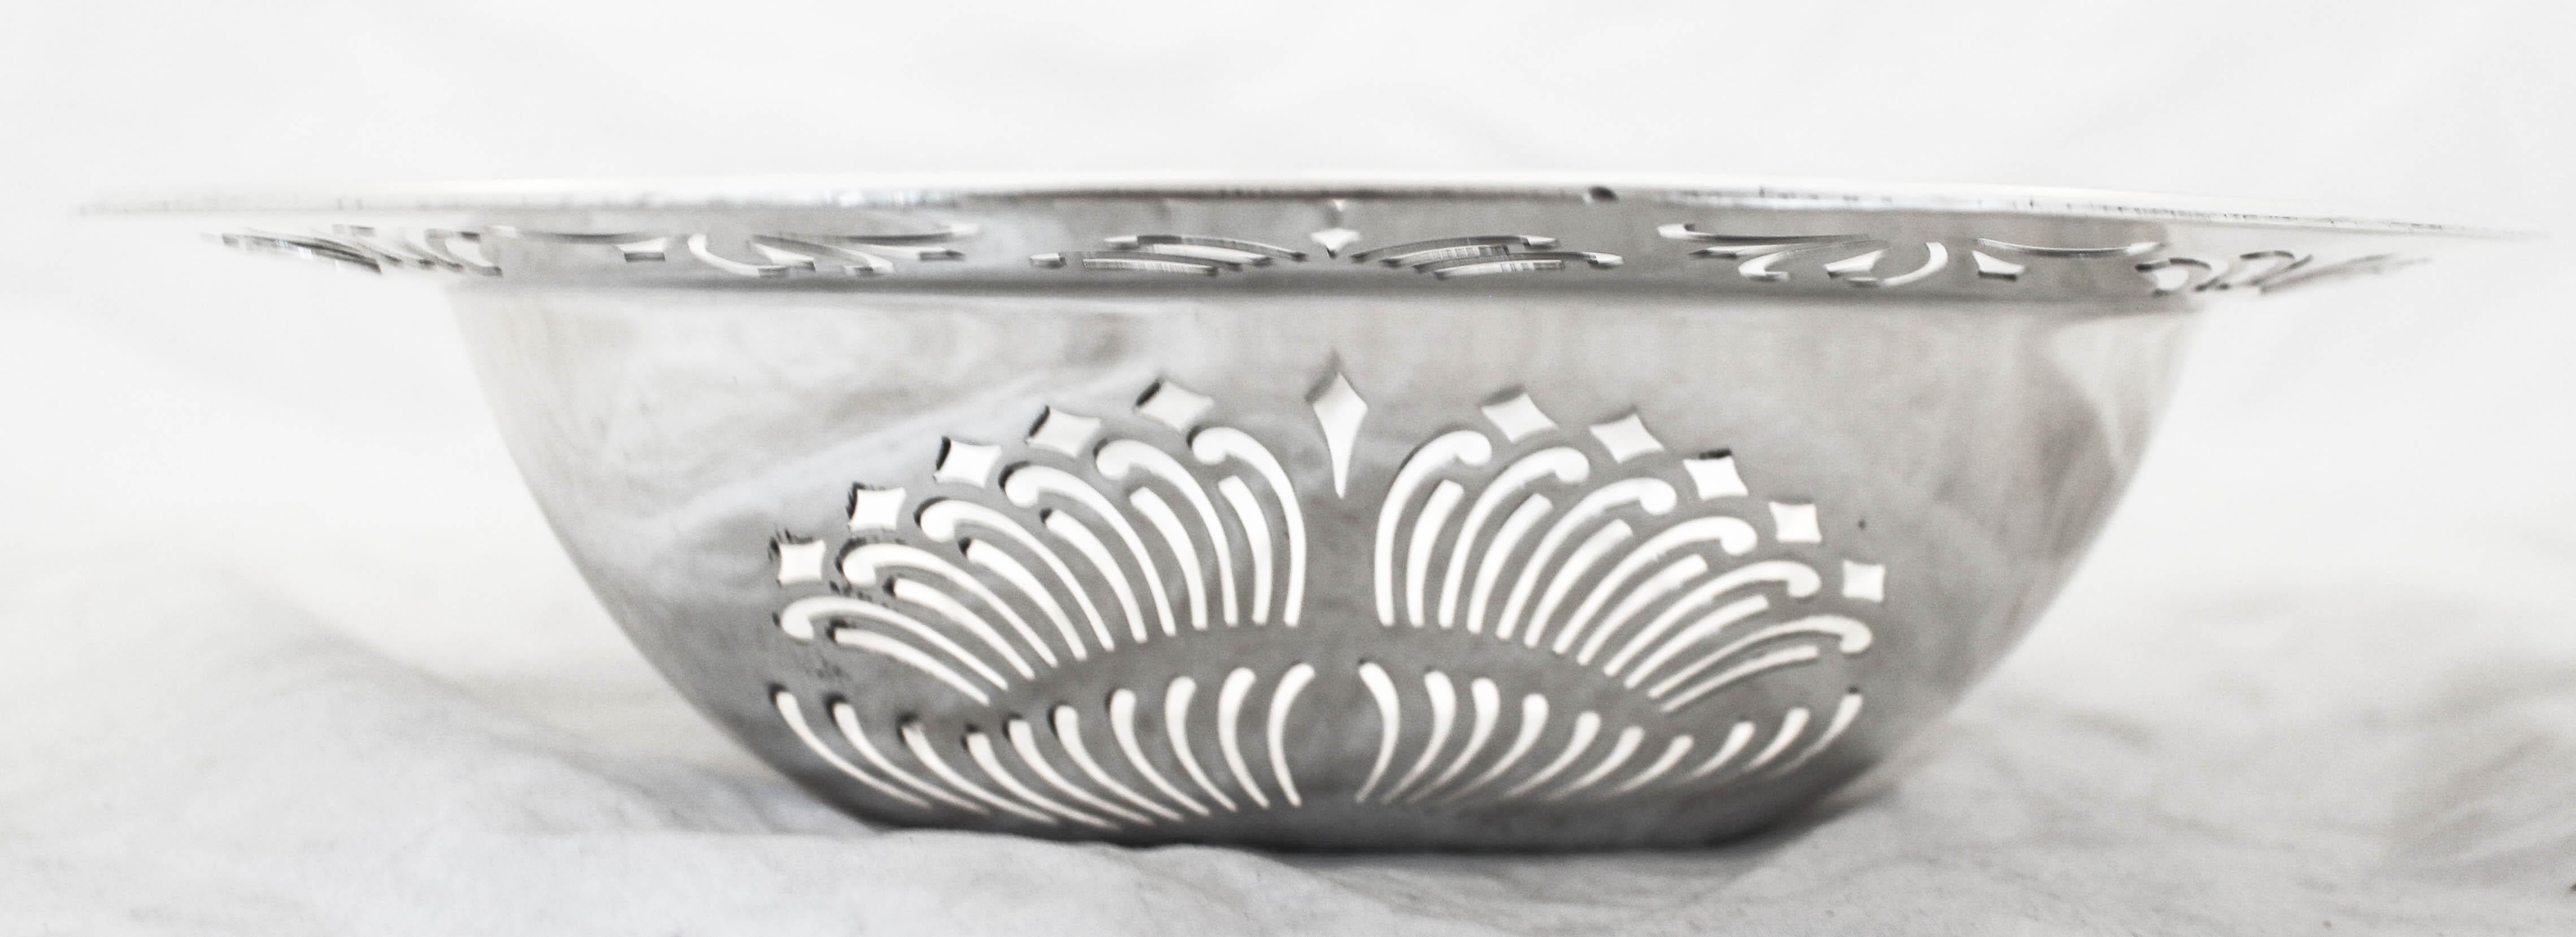 Being offered is a sterling silver bowl by Towle Silversmiths. A rather unusual shape and design, the piece is not like other bowls we’ve had and sold. The entire body and rim has a cutout design that gives it a lot of personality. Swirls and curves